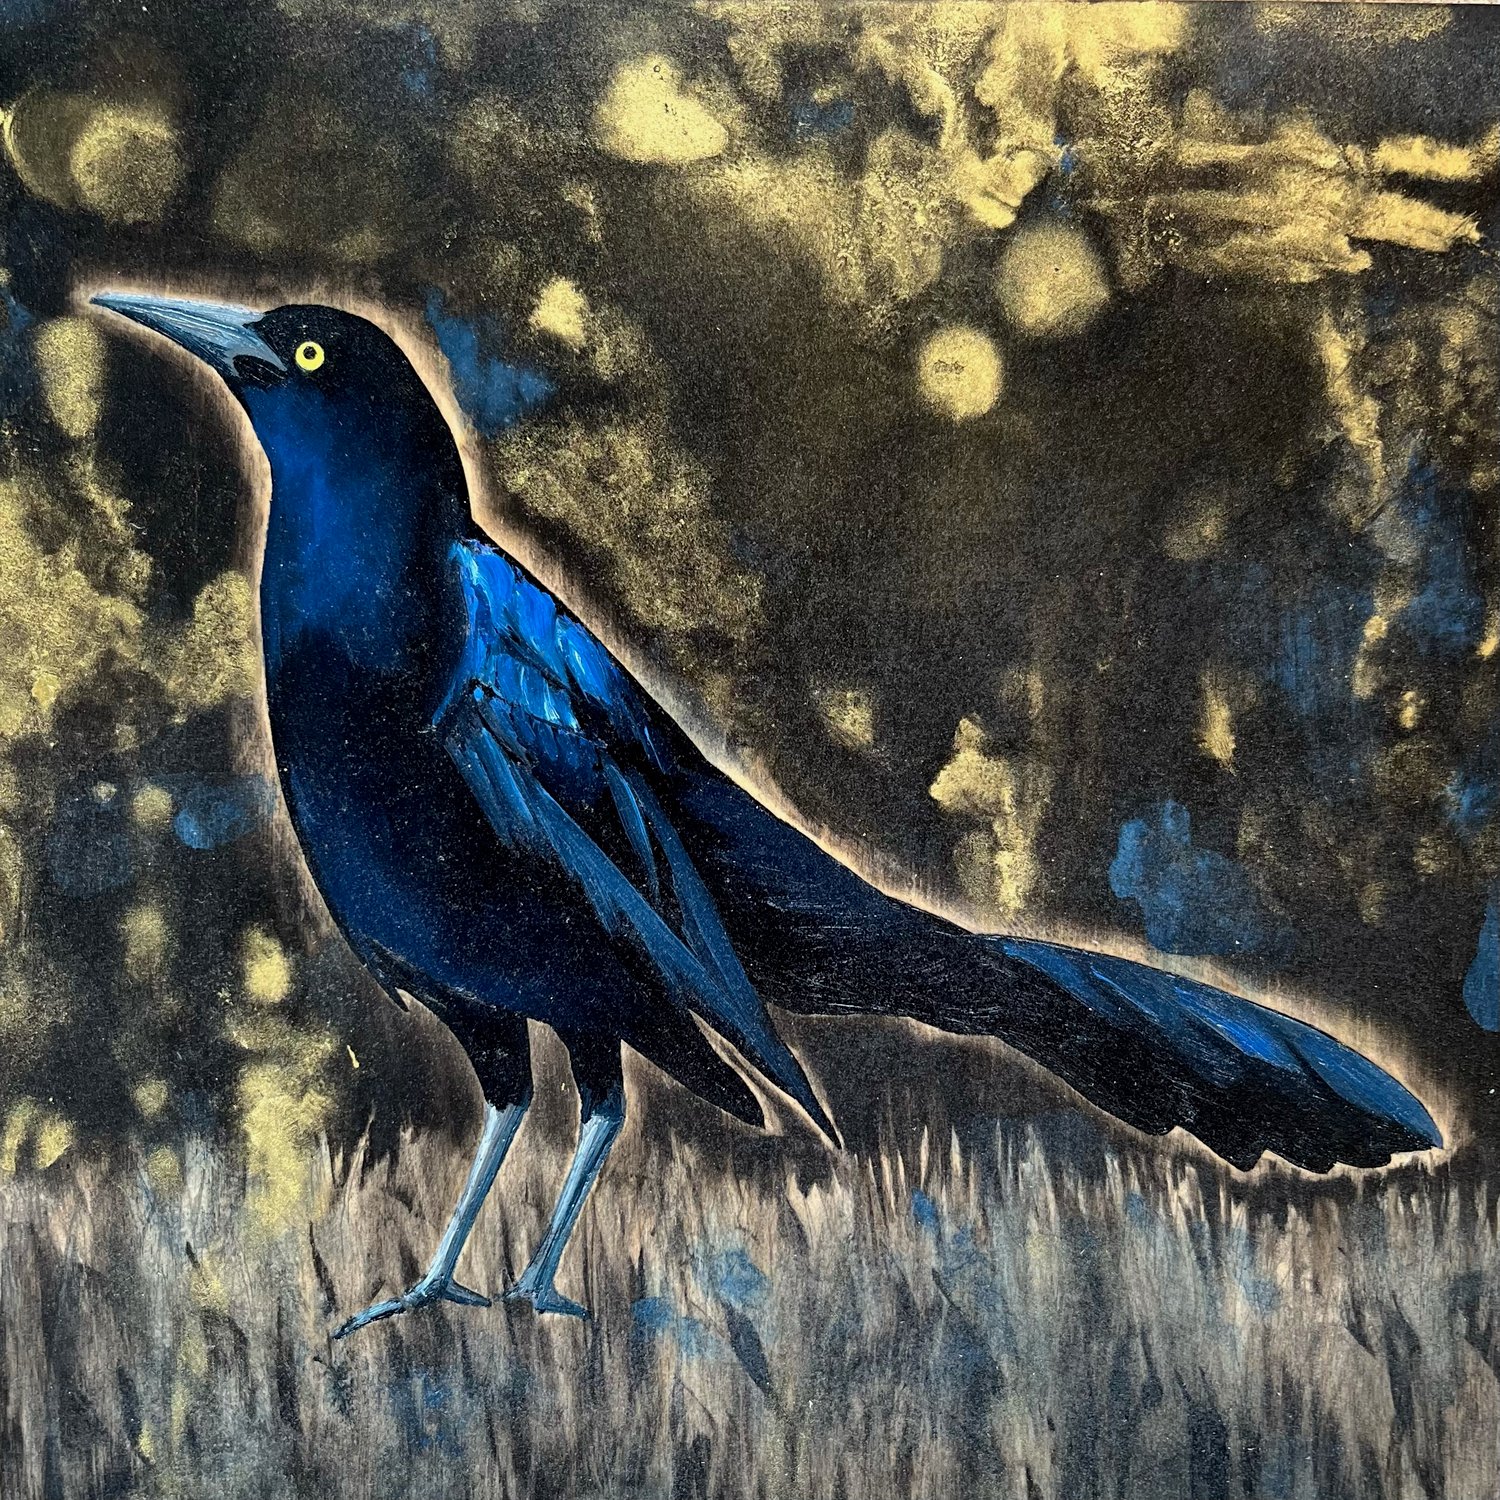 Eclipse Grackle #33 by Carly Weaver - Original Painting